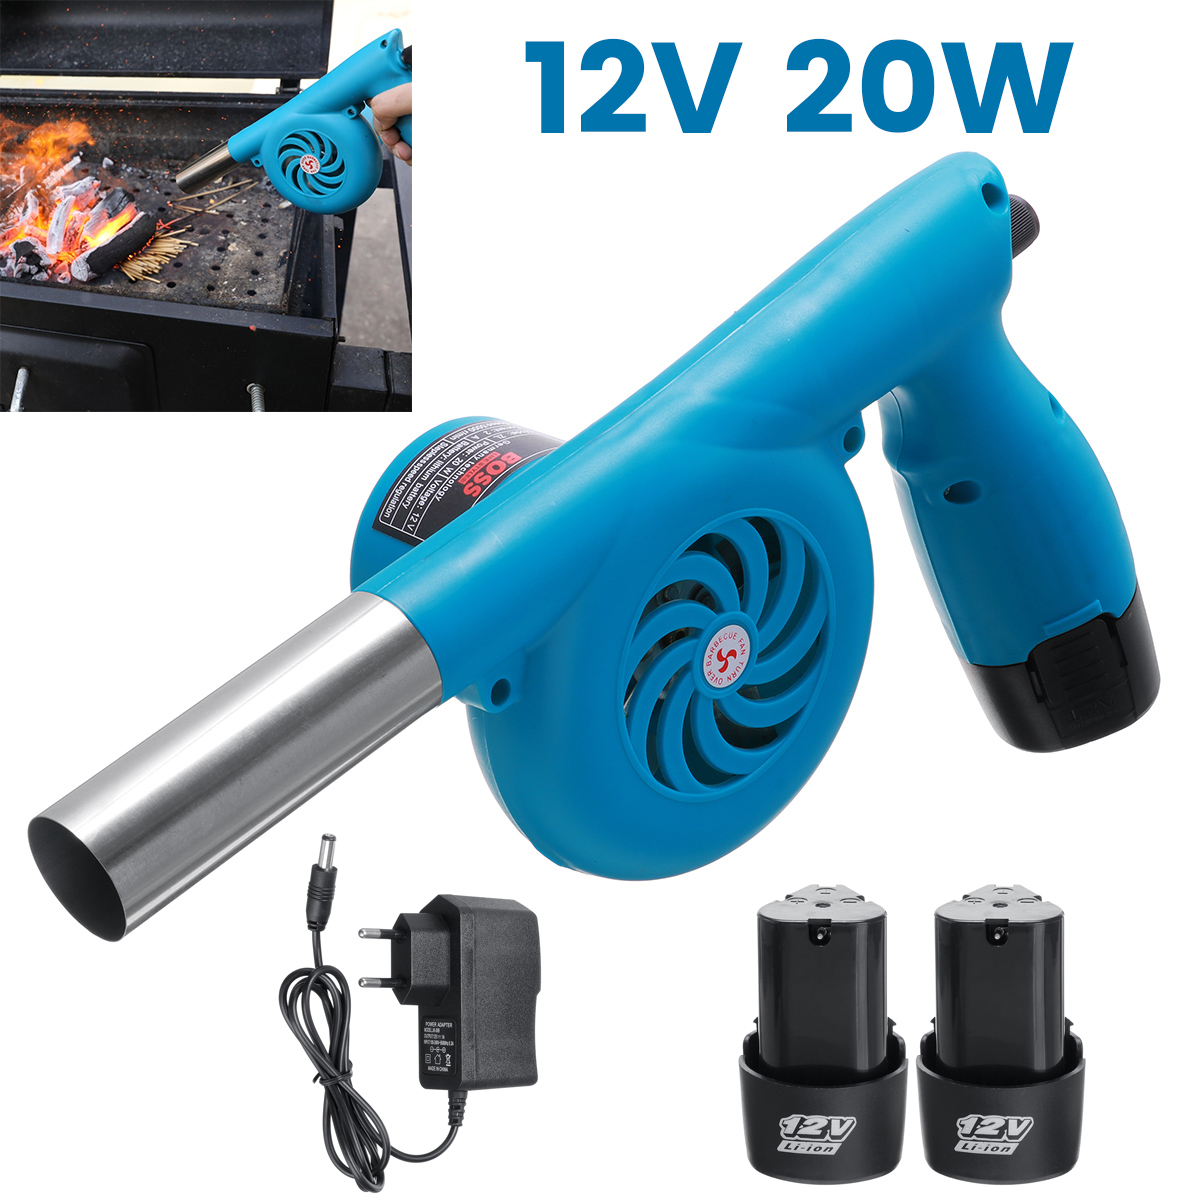 12V-Outdoor-Cooking-Electric-BBQ-Fan-Air-Blower-Rechargeable-BBQ-Grill-Fan-Guns-Portable-Fire-Campin-1861810-3